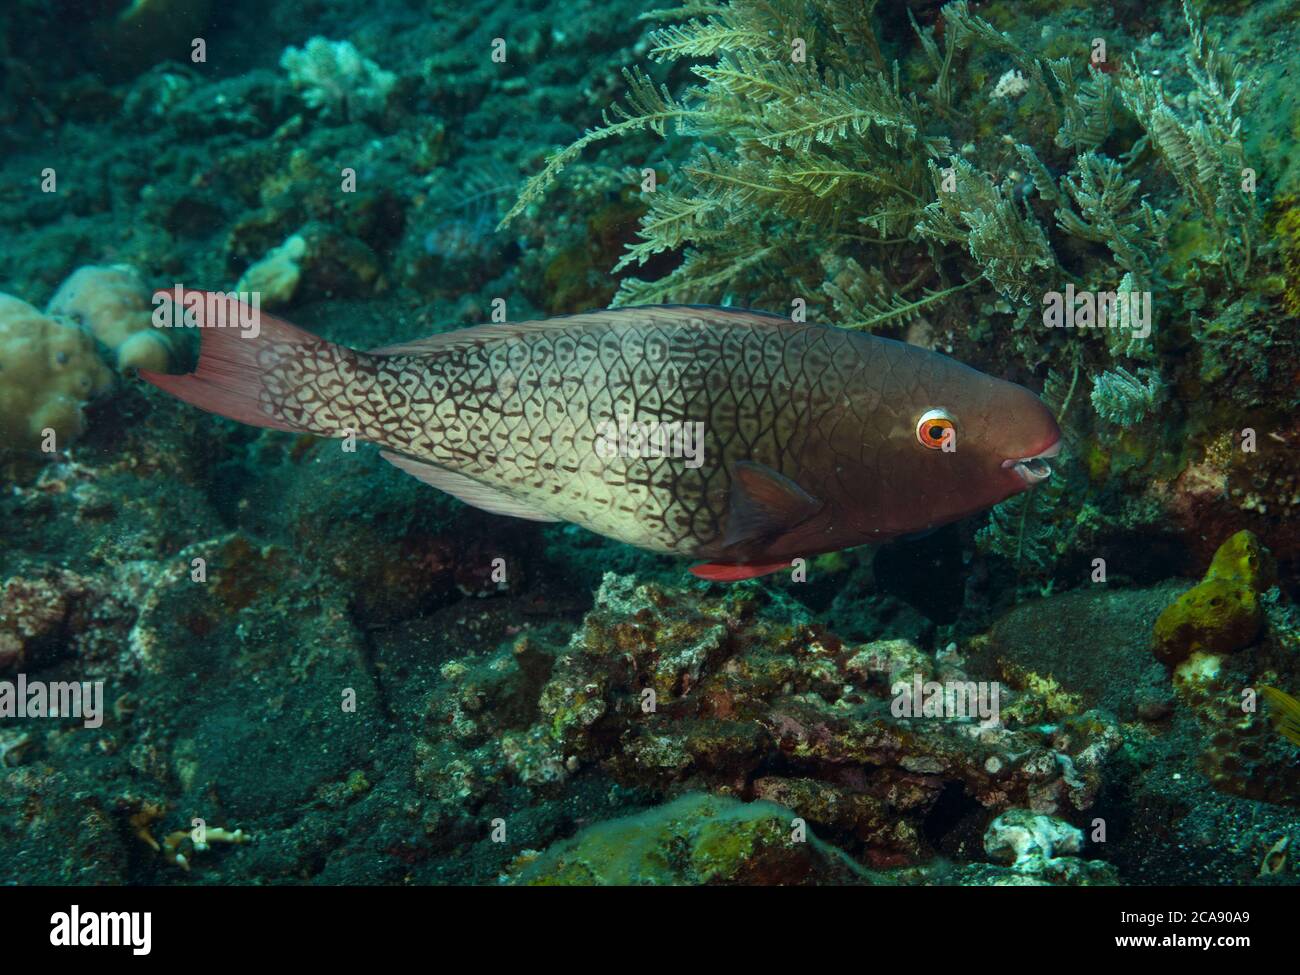 The initial phase of an ember parrotfish, Scarus rubroviolaceus, Scaridae, swimming over reef, Tulamben, Bali Stock Photo